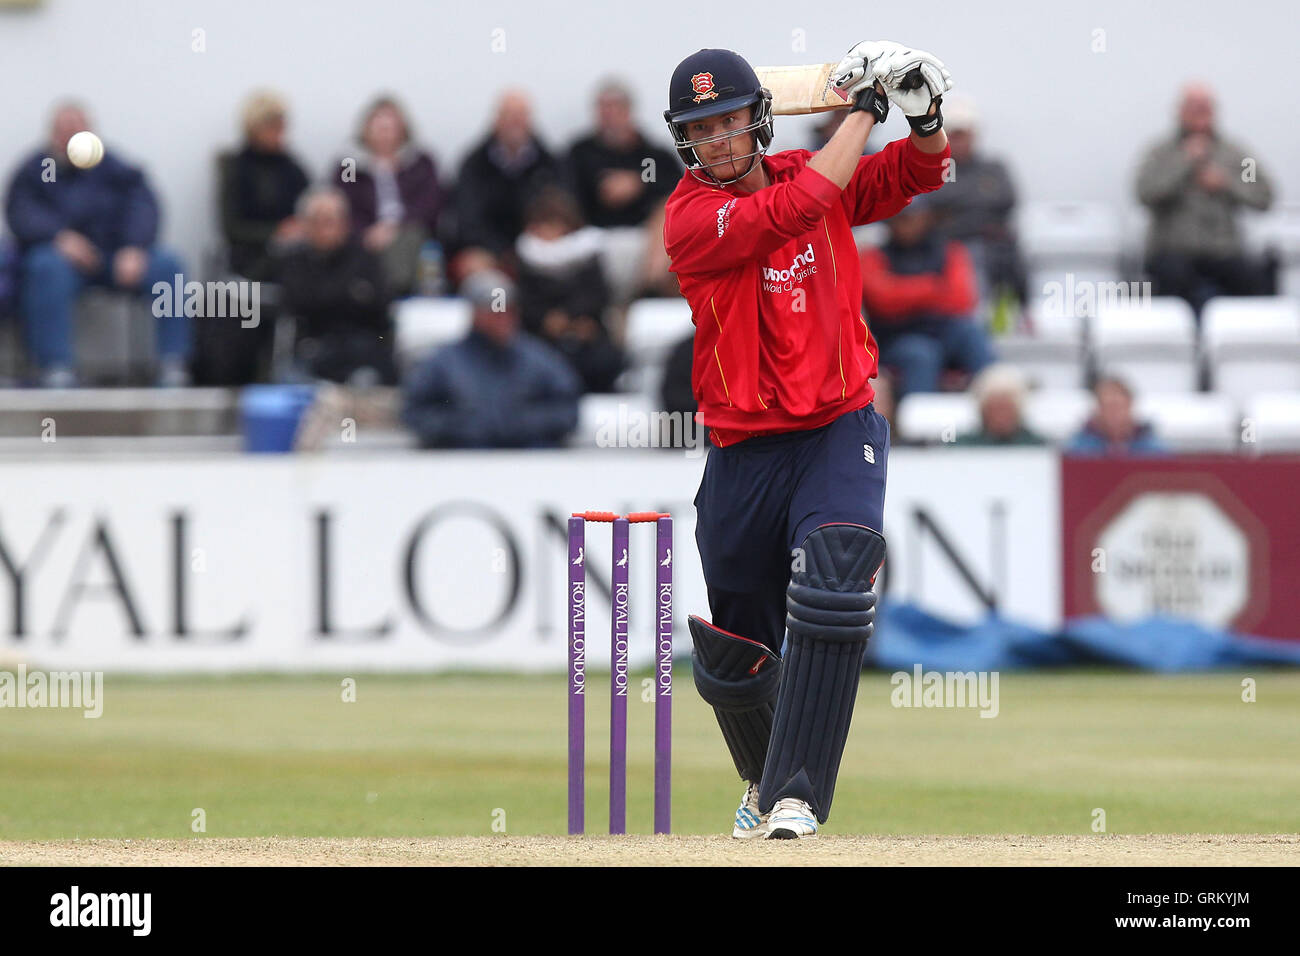 Tom Westley in batting action for Essex - Northamptonshire Steelbacks vs Essex Eagles - Royal London One-Day Cup at the County Ground, Northampton - 21/08/14 Stock Photo